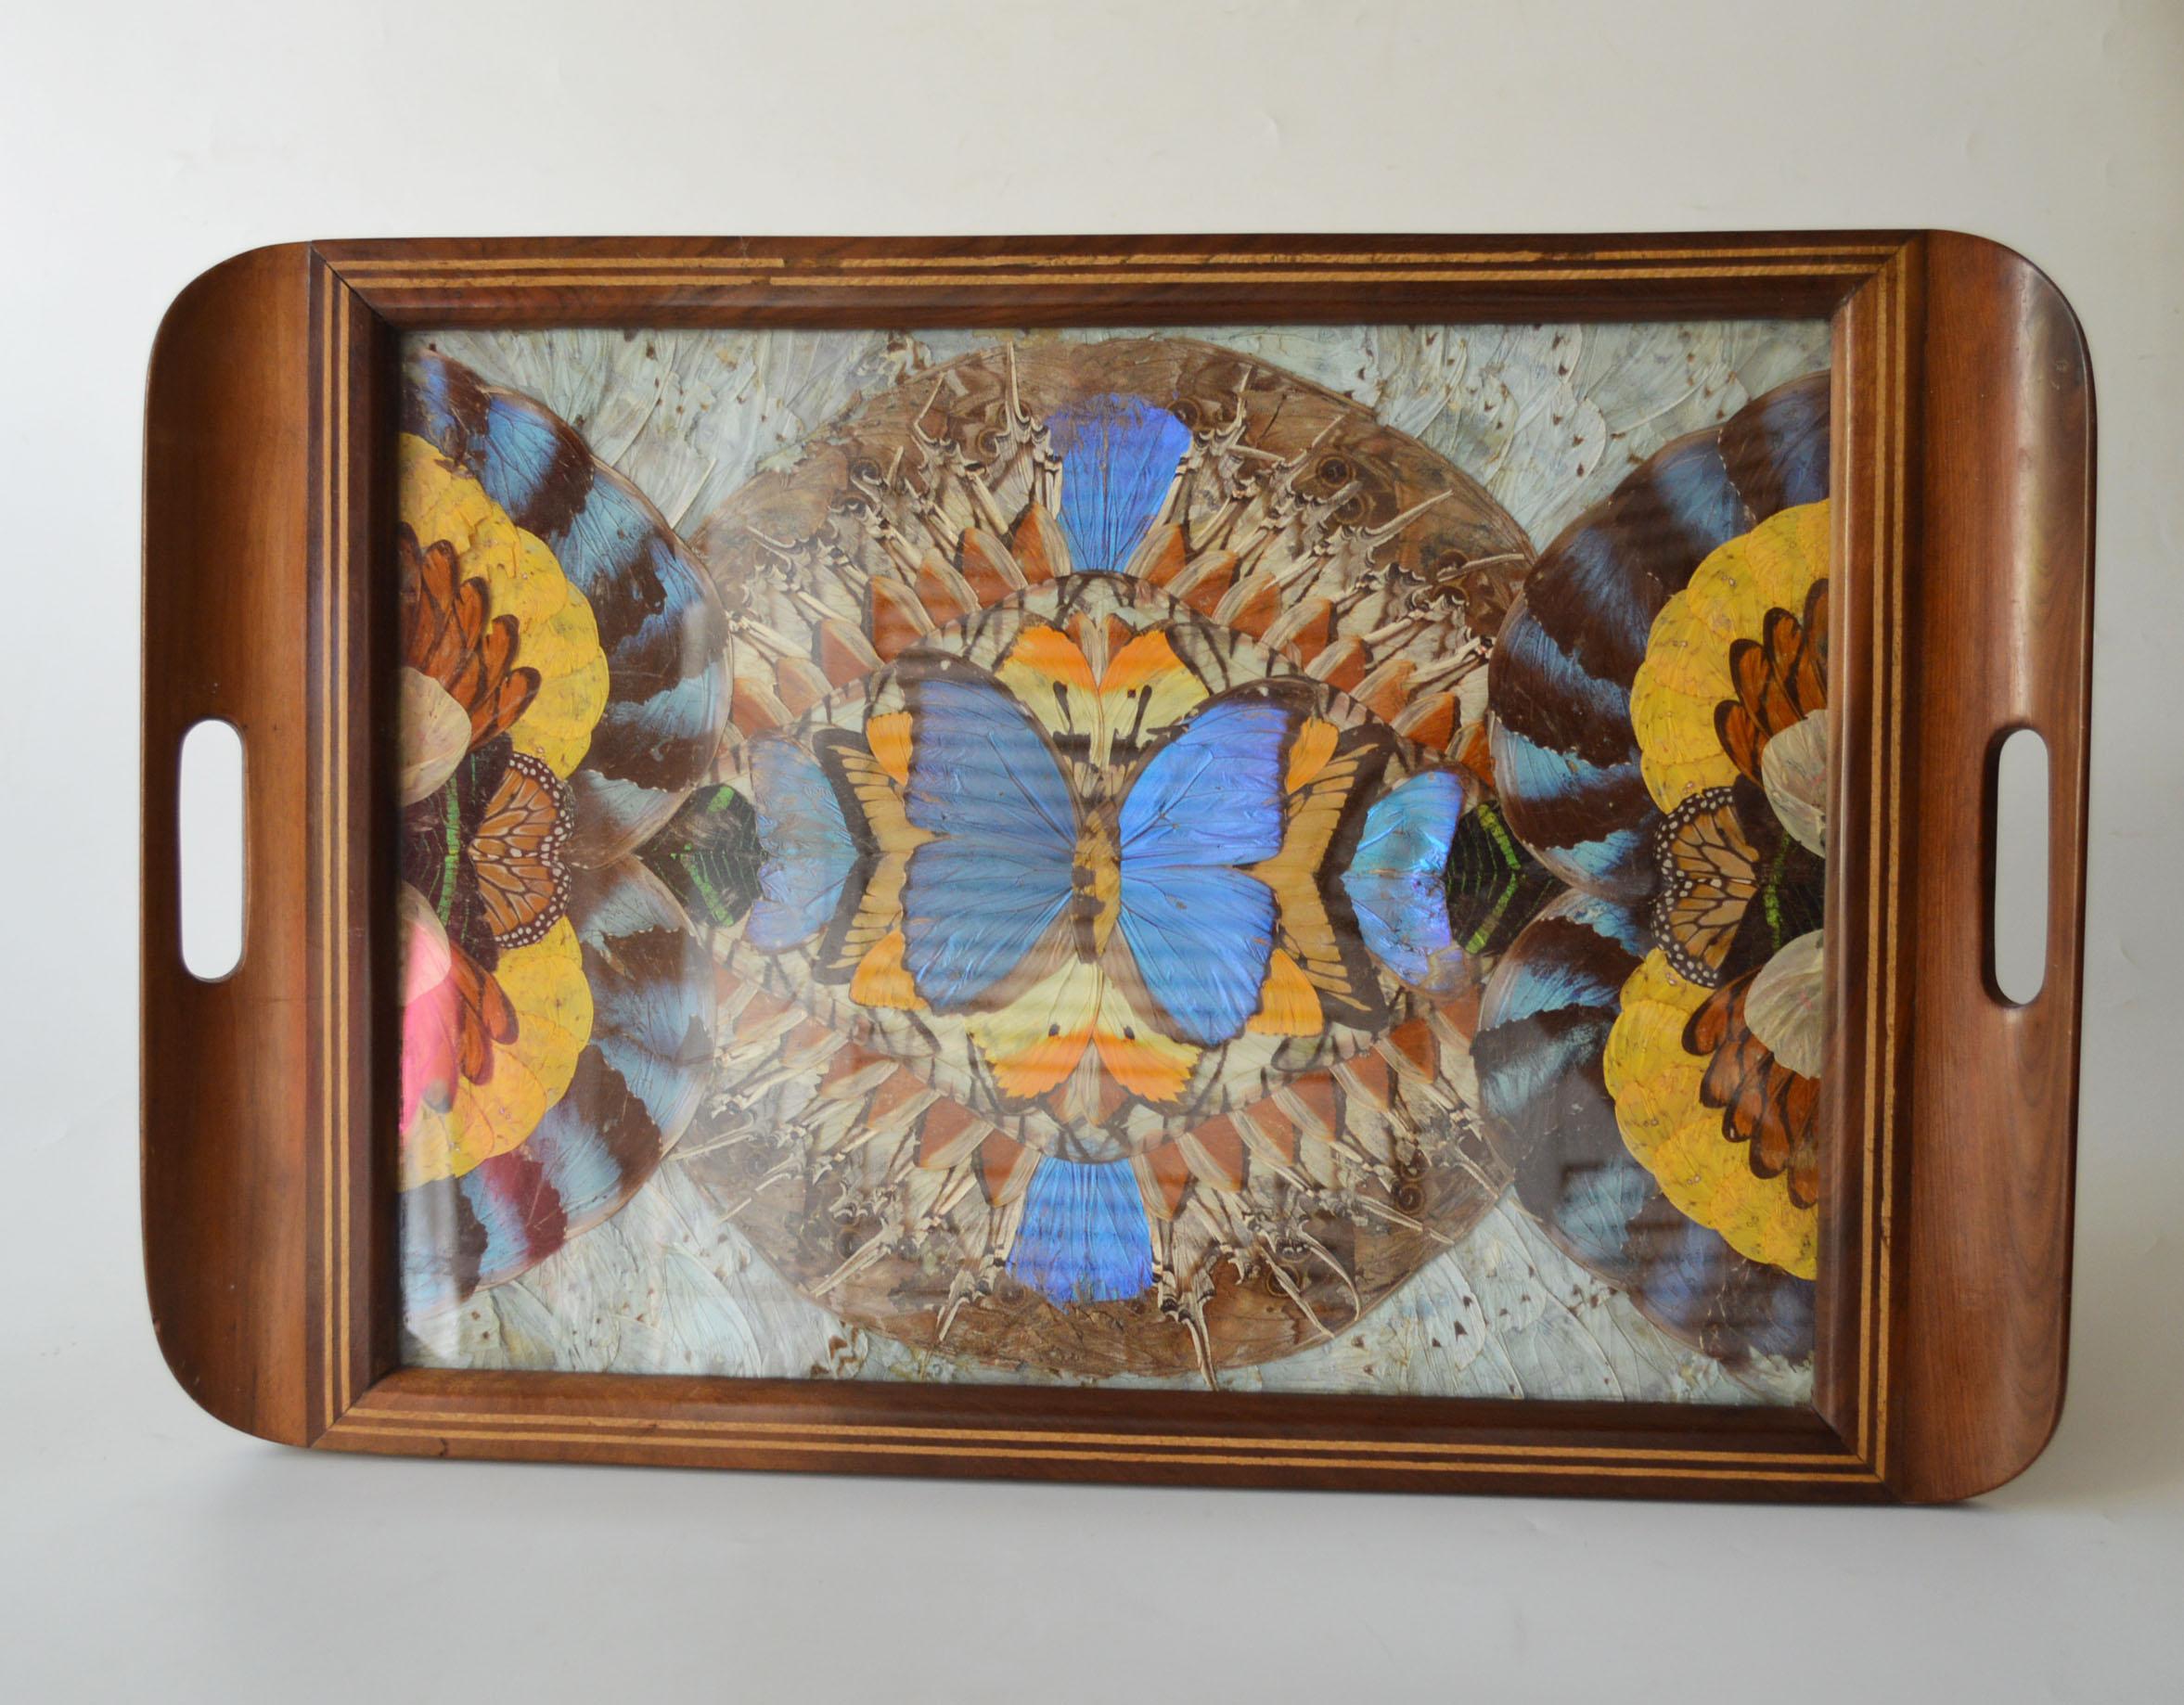 A fine vintage marquetry inlaid hard wood  tray with dazzling geometric patterns made from the wings of the brilliant iridescent Blue Morpho butterfly.  side carrying handles with  glass top and wood backing. A wonderful object for personal use or